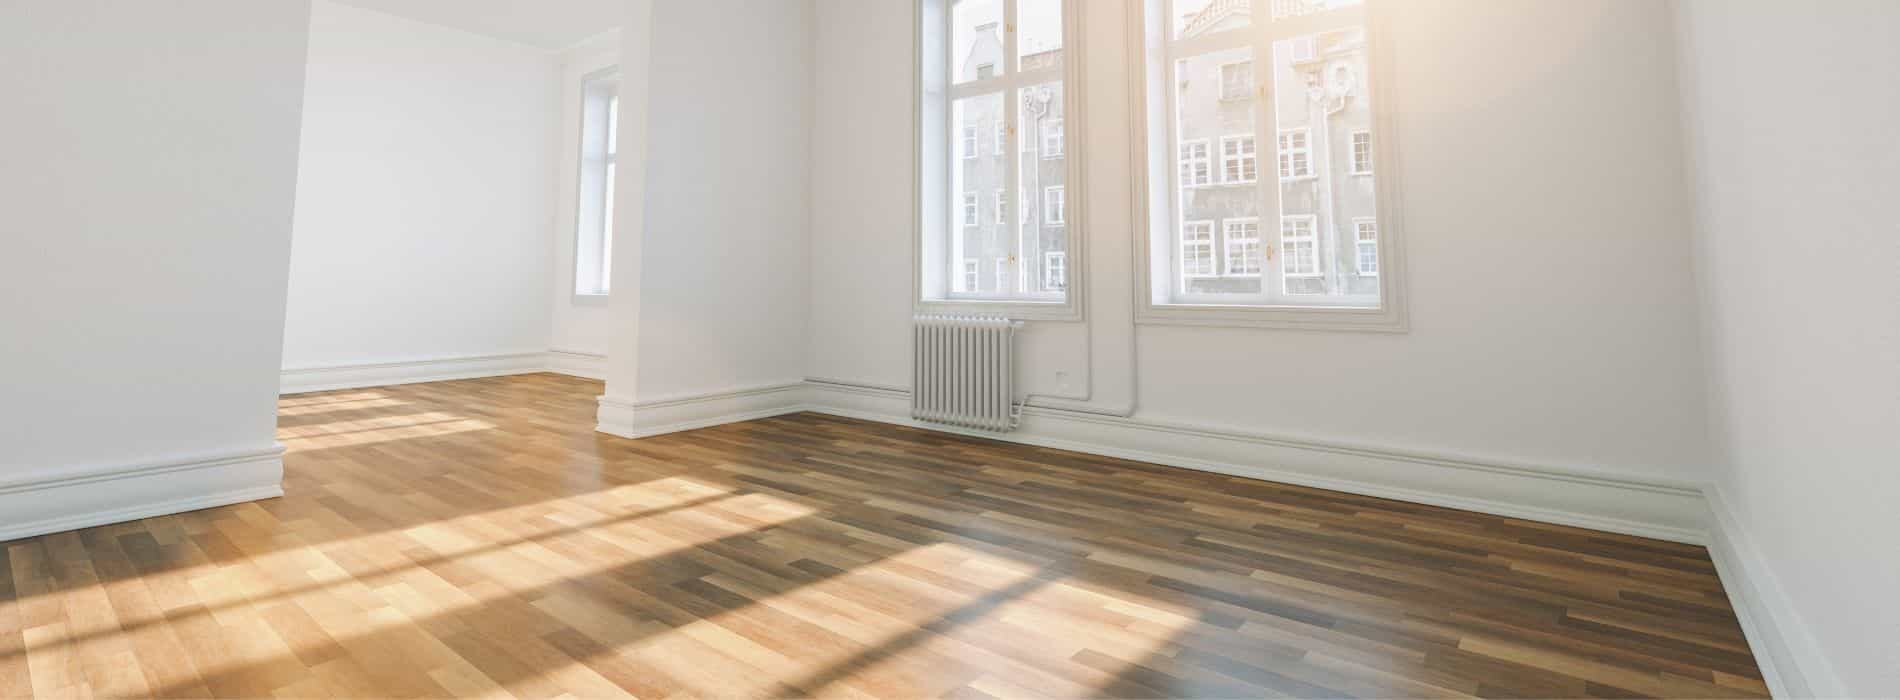 In Tottenham, N17, a hardwood floor has been masterfully restored through sanding, buffing, and whitewashing with Bona 2K Frost, then treated with two coats of Traffic HD 10% sheen matte lacquer, resulting in a stunning, long-lasting finish.